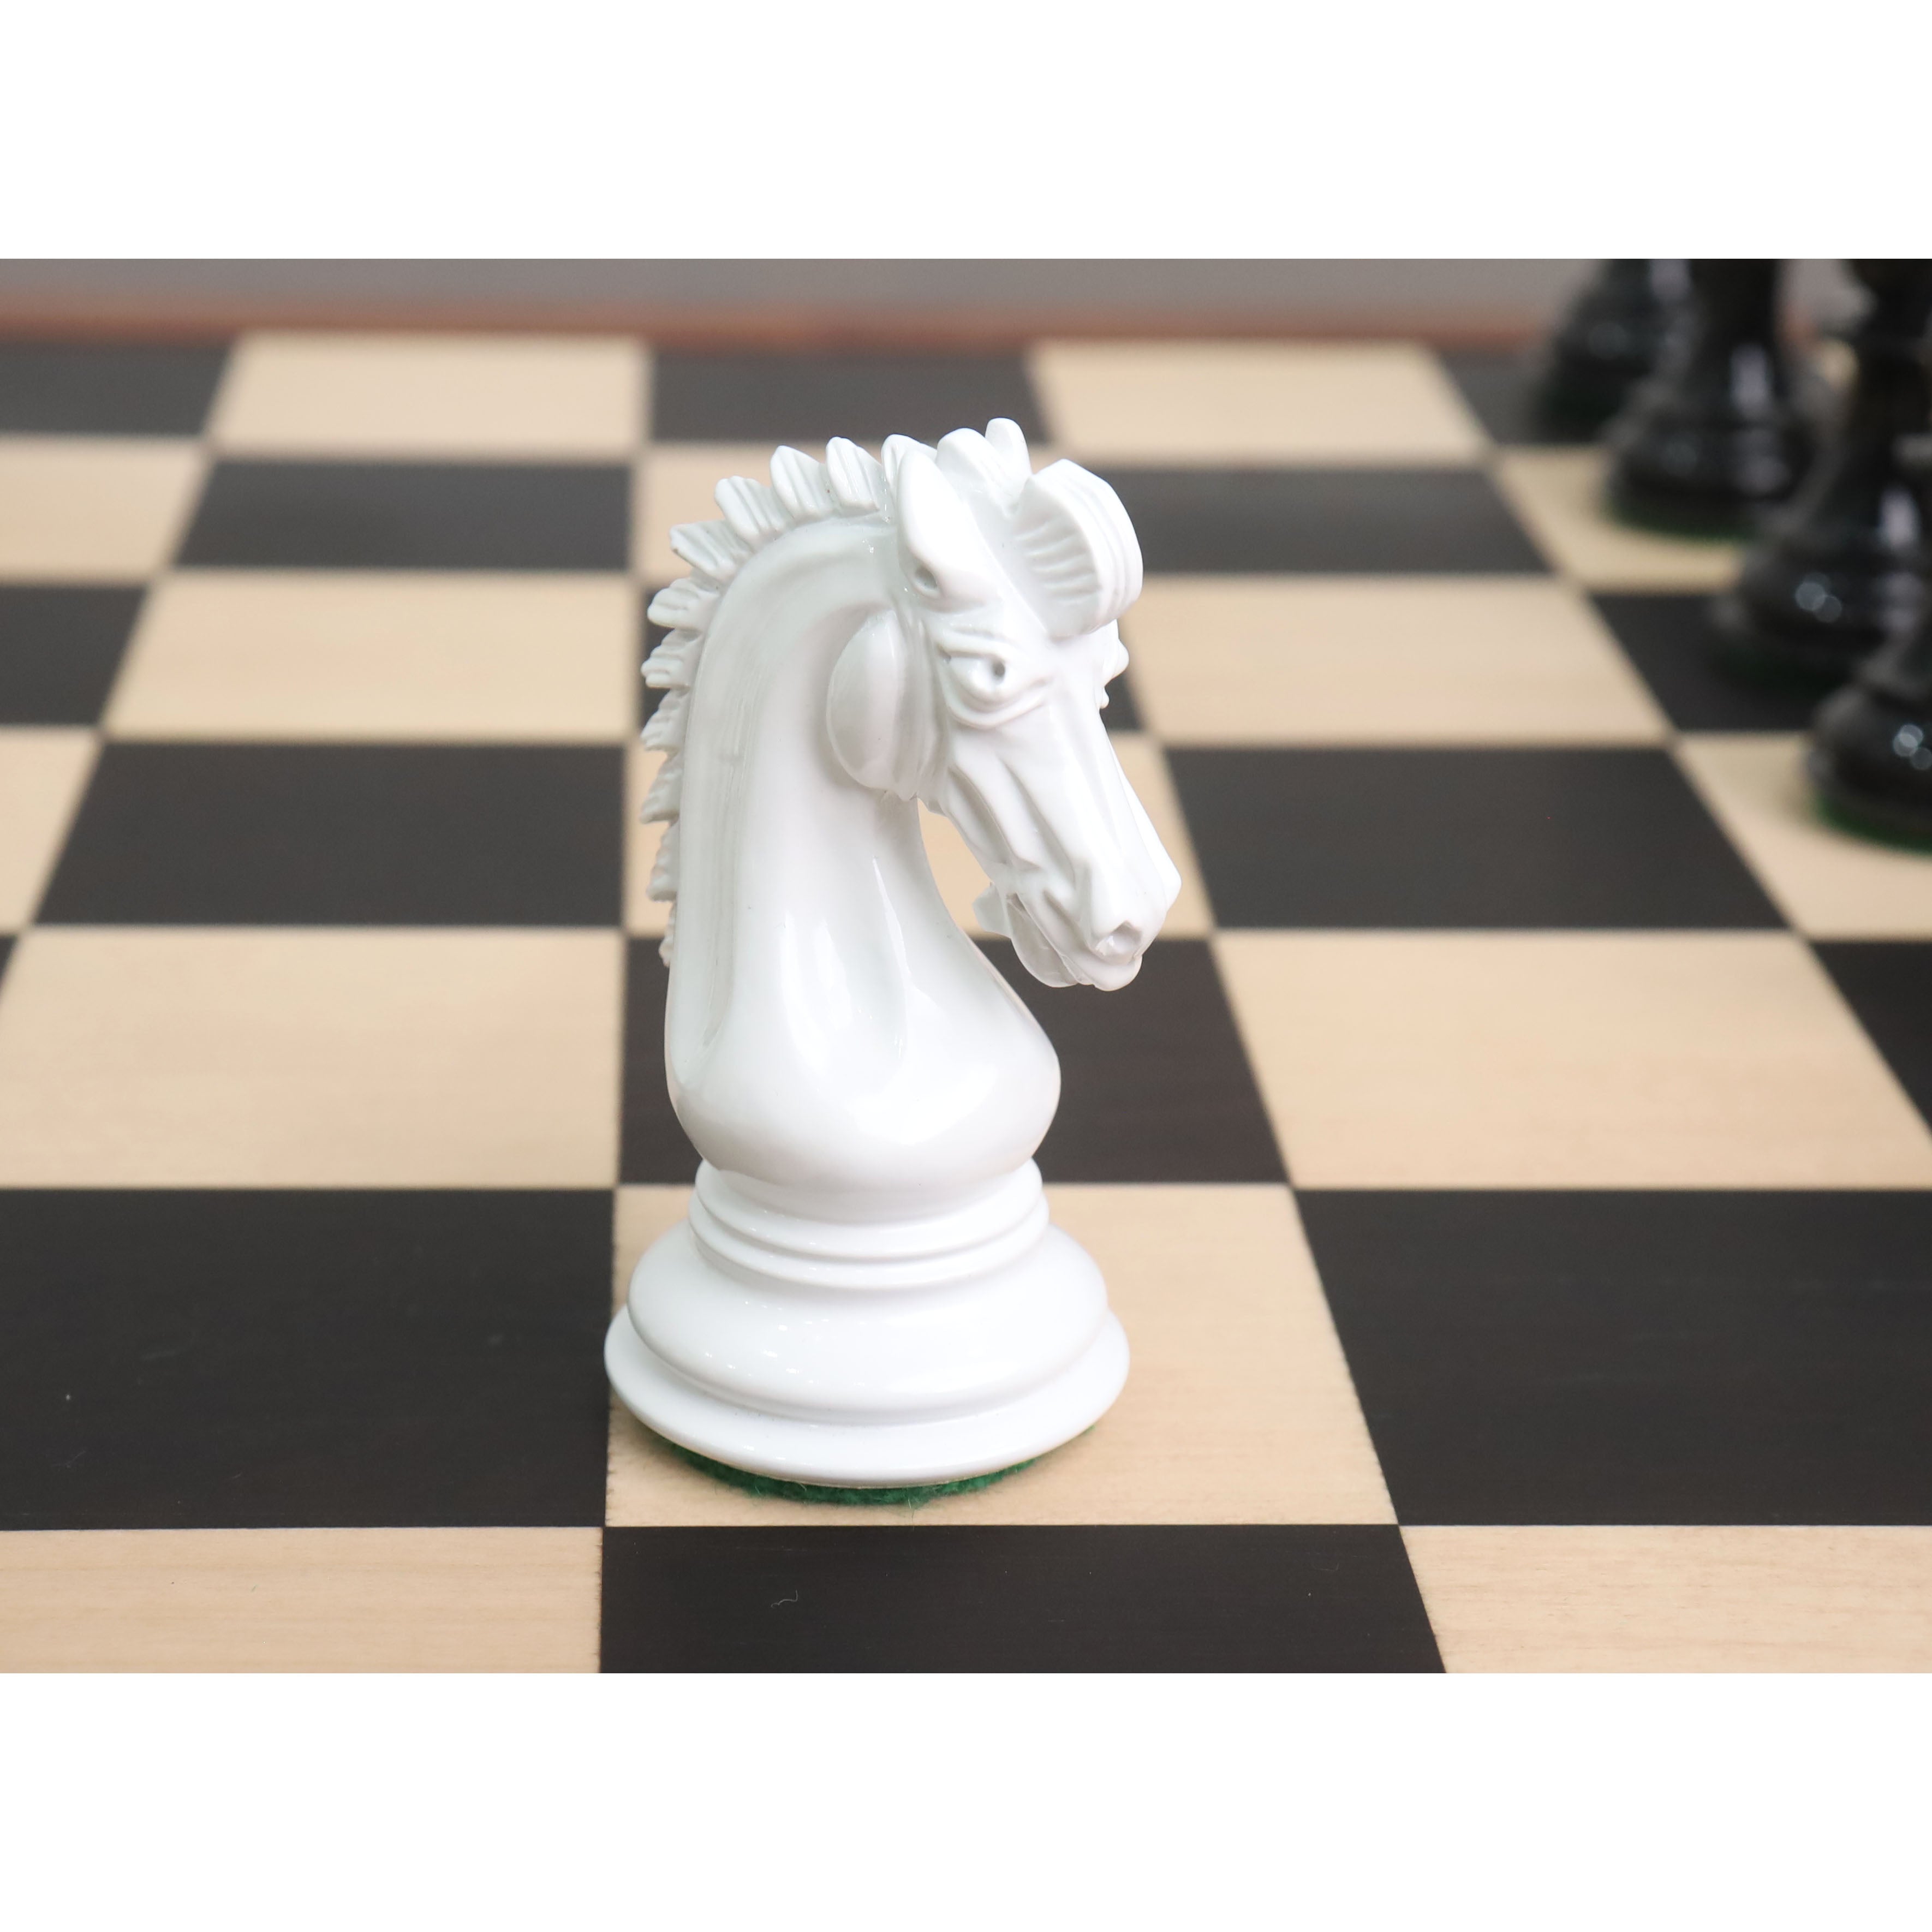 3.7" Emperor Staunton Chess Pieces Only set - Lacquered White and Black Boxwood